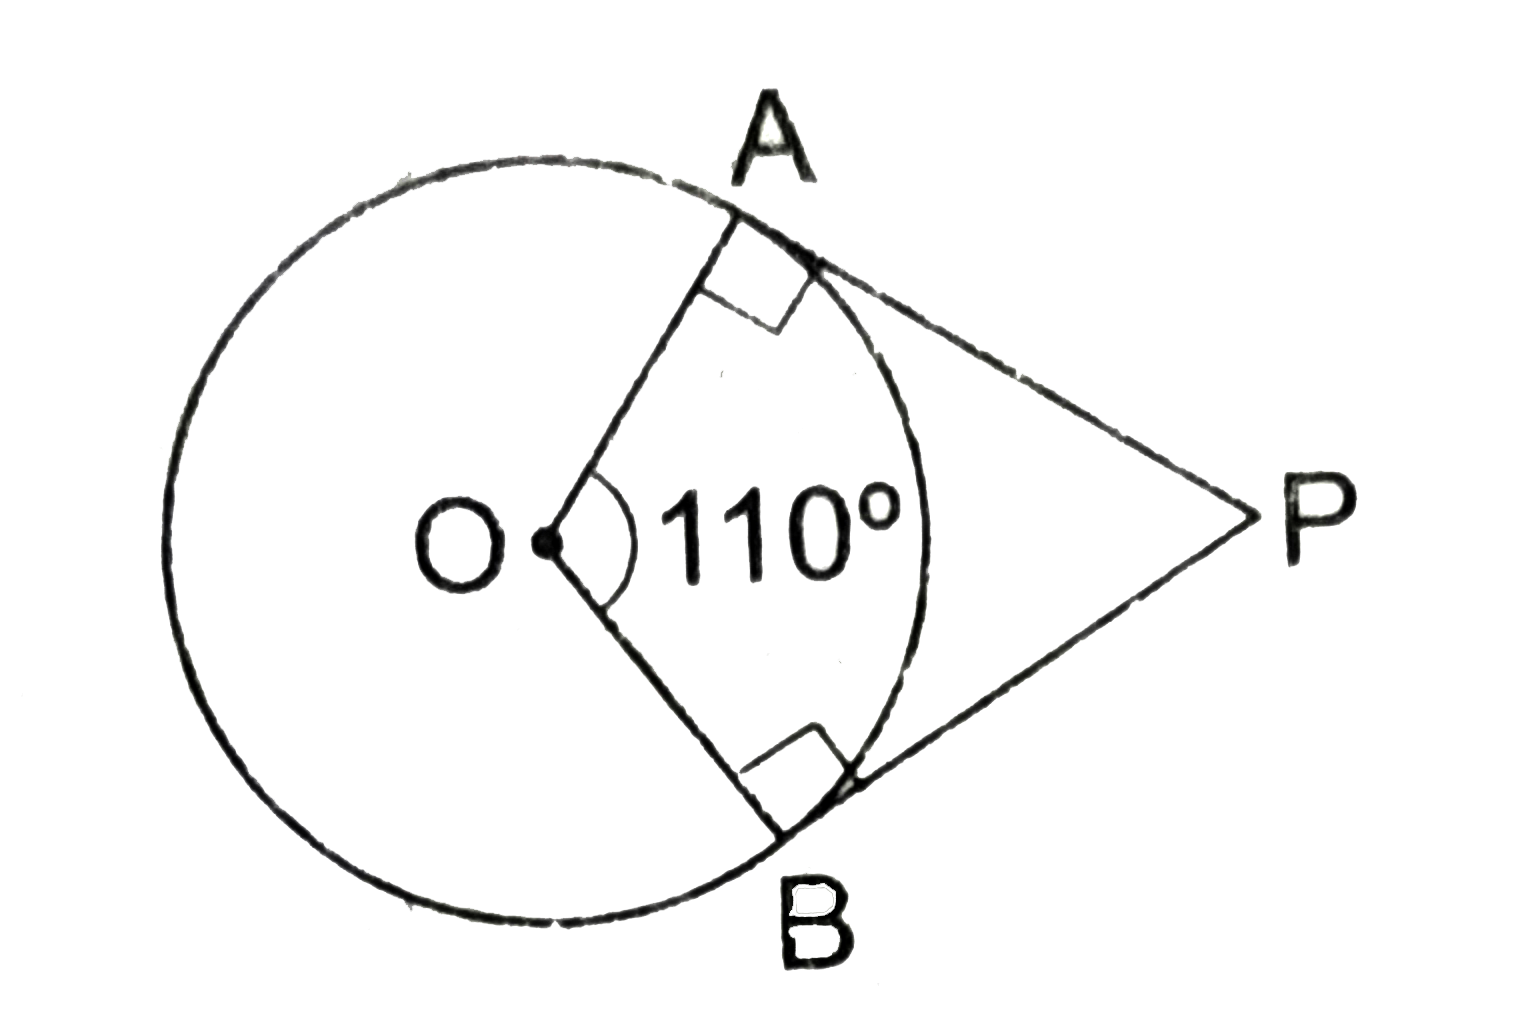 If PA and PB are two tangents to a circle with centre O such that /AOB=110^(@) then /APB is equal to